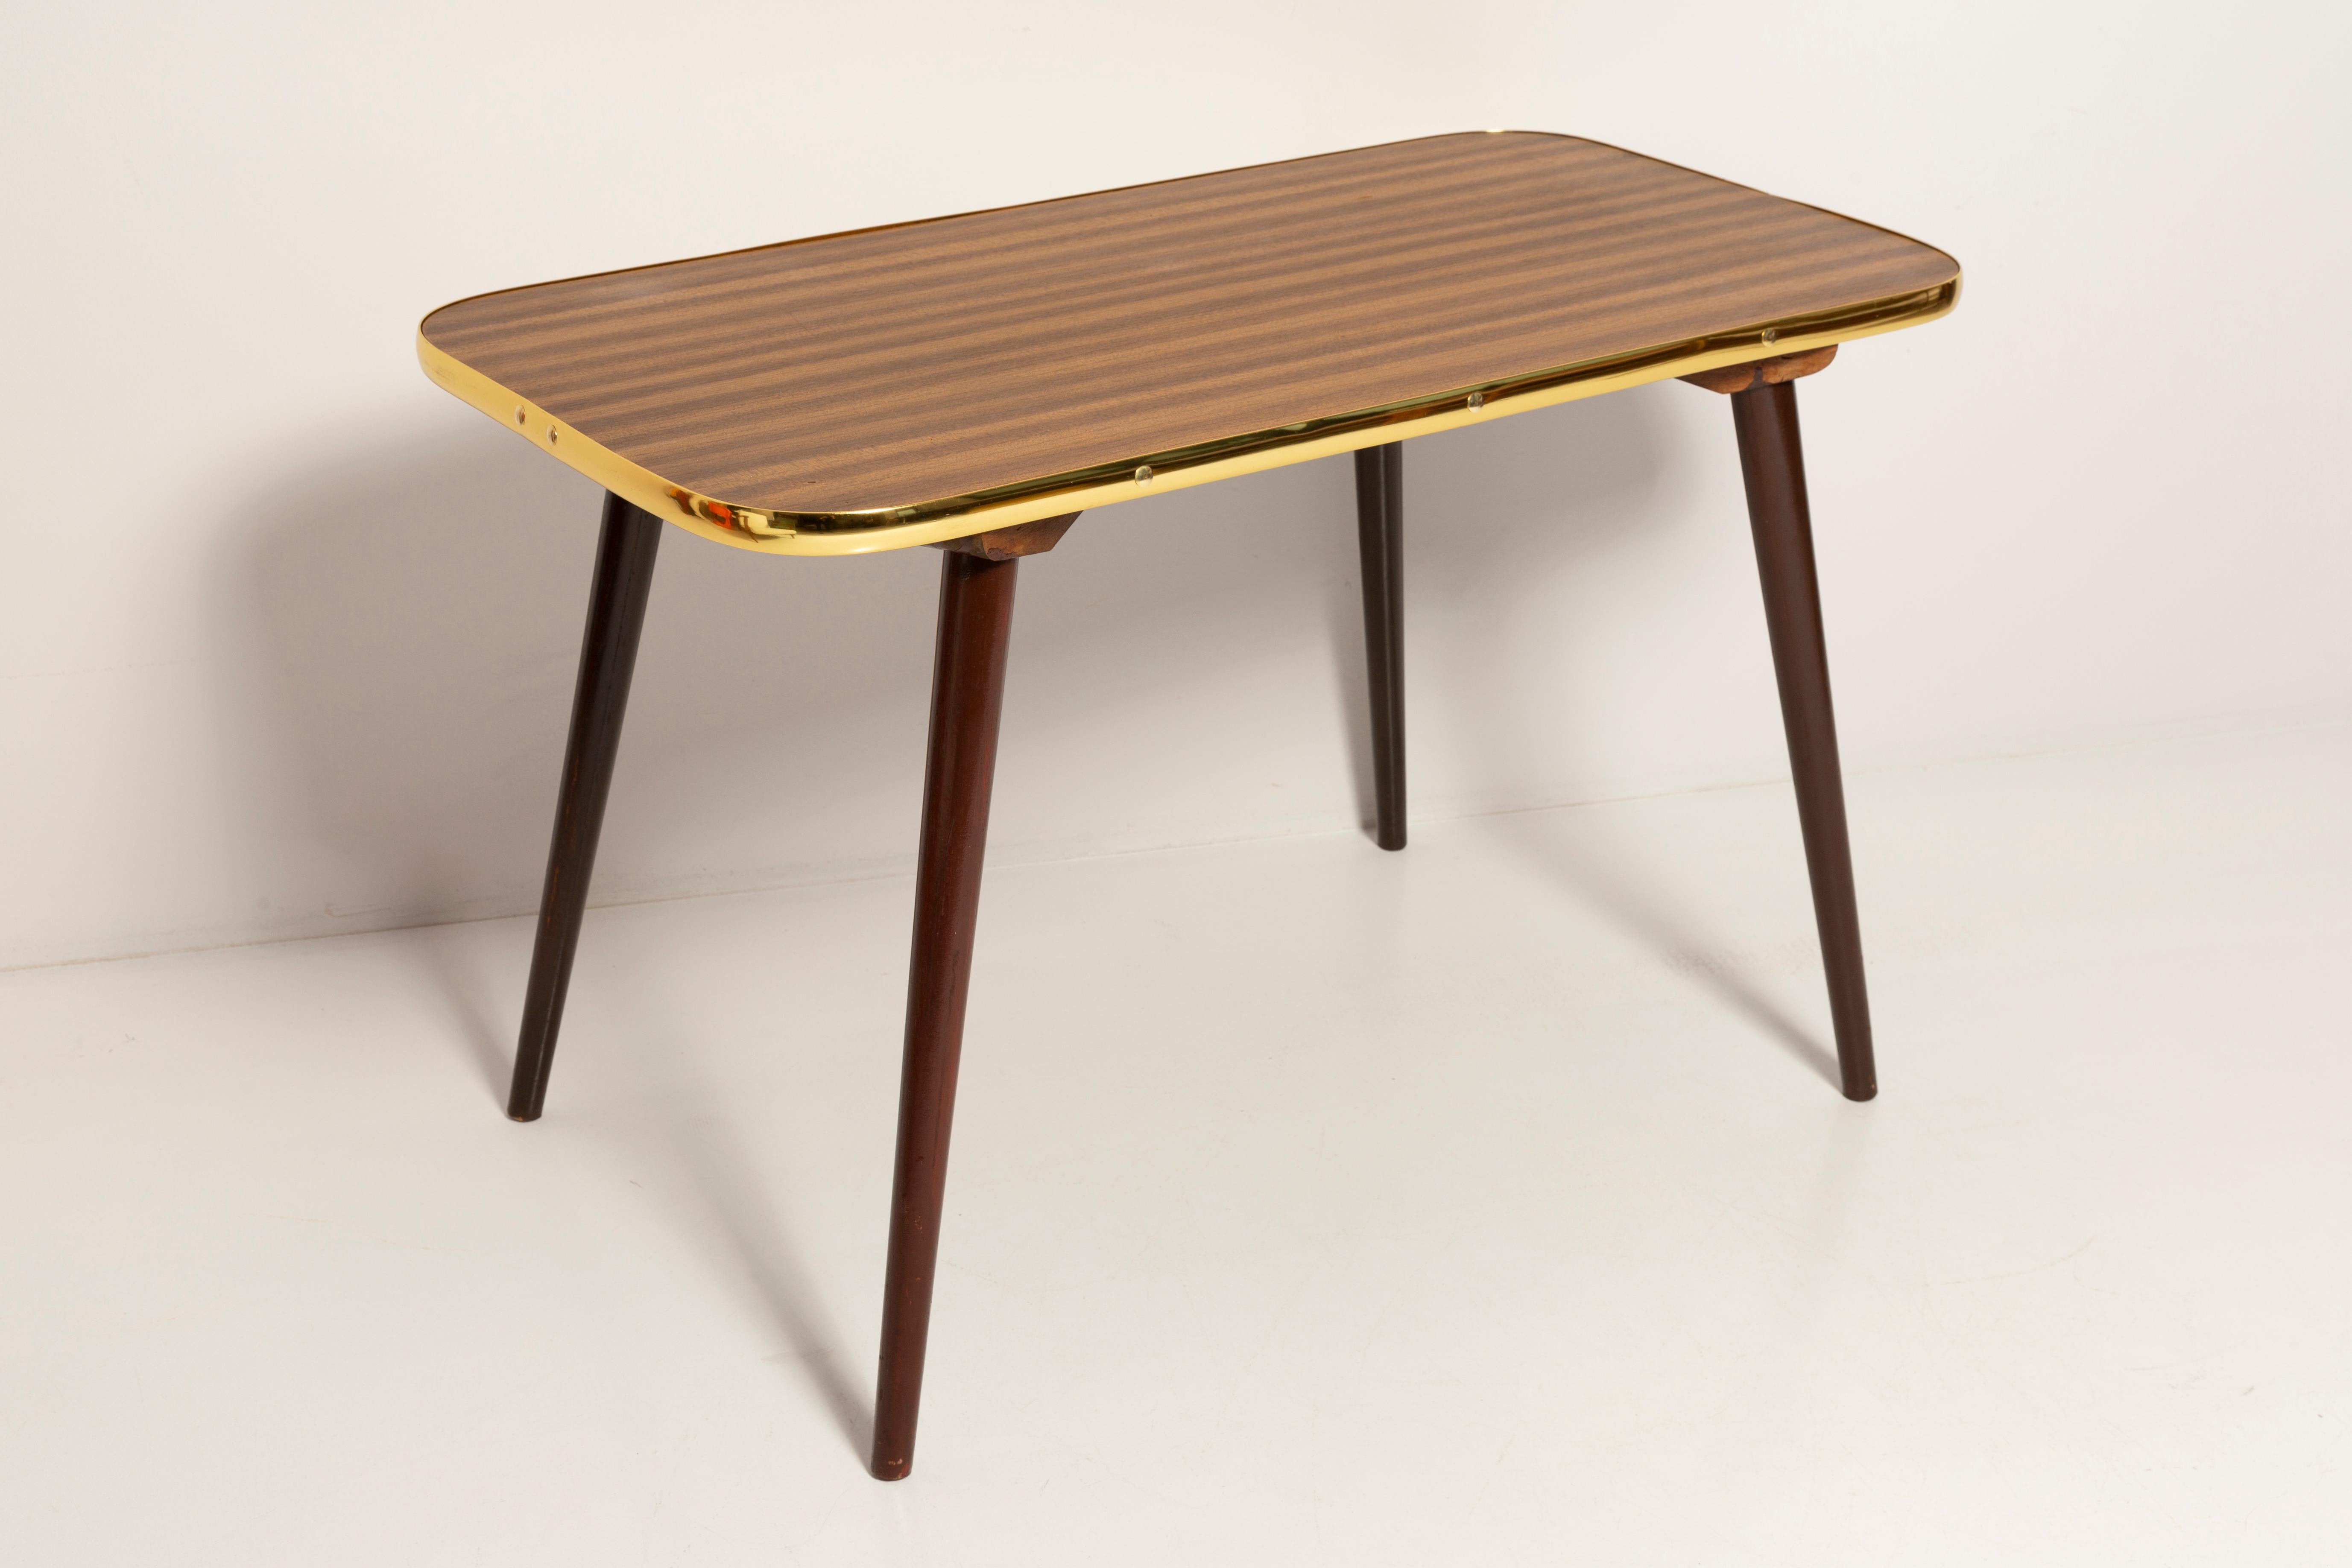 Coffee table from the 1960s. It was manufactured in Poland in 1960s. The table was made of wood and veneer plywood, it was refreshed. Original vintage condition.